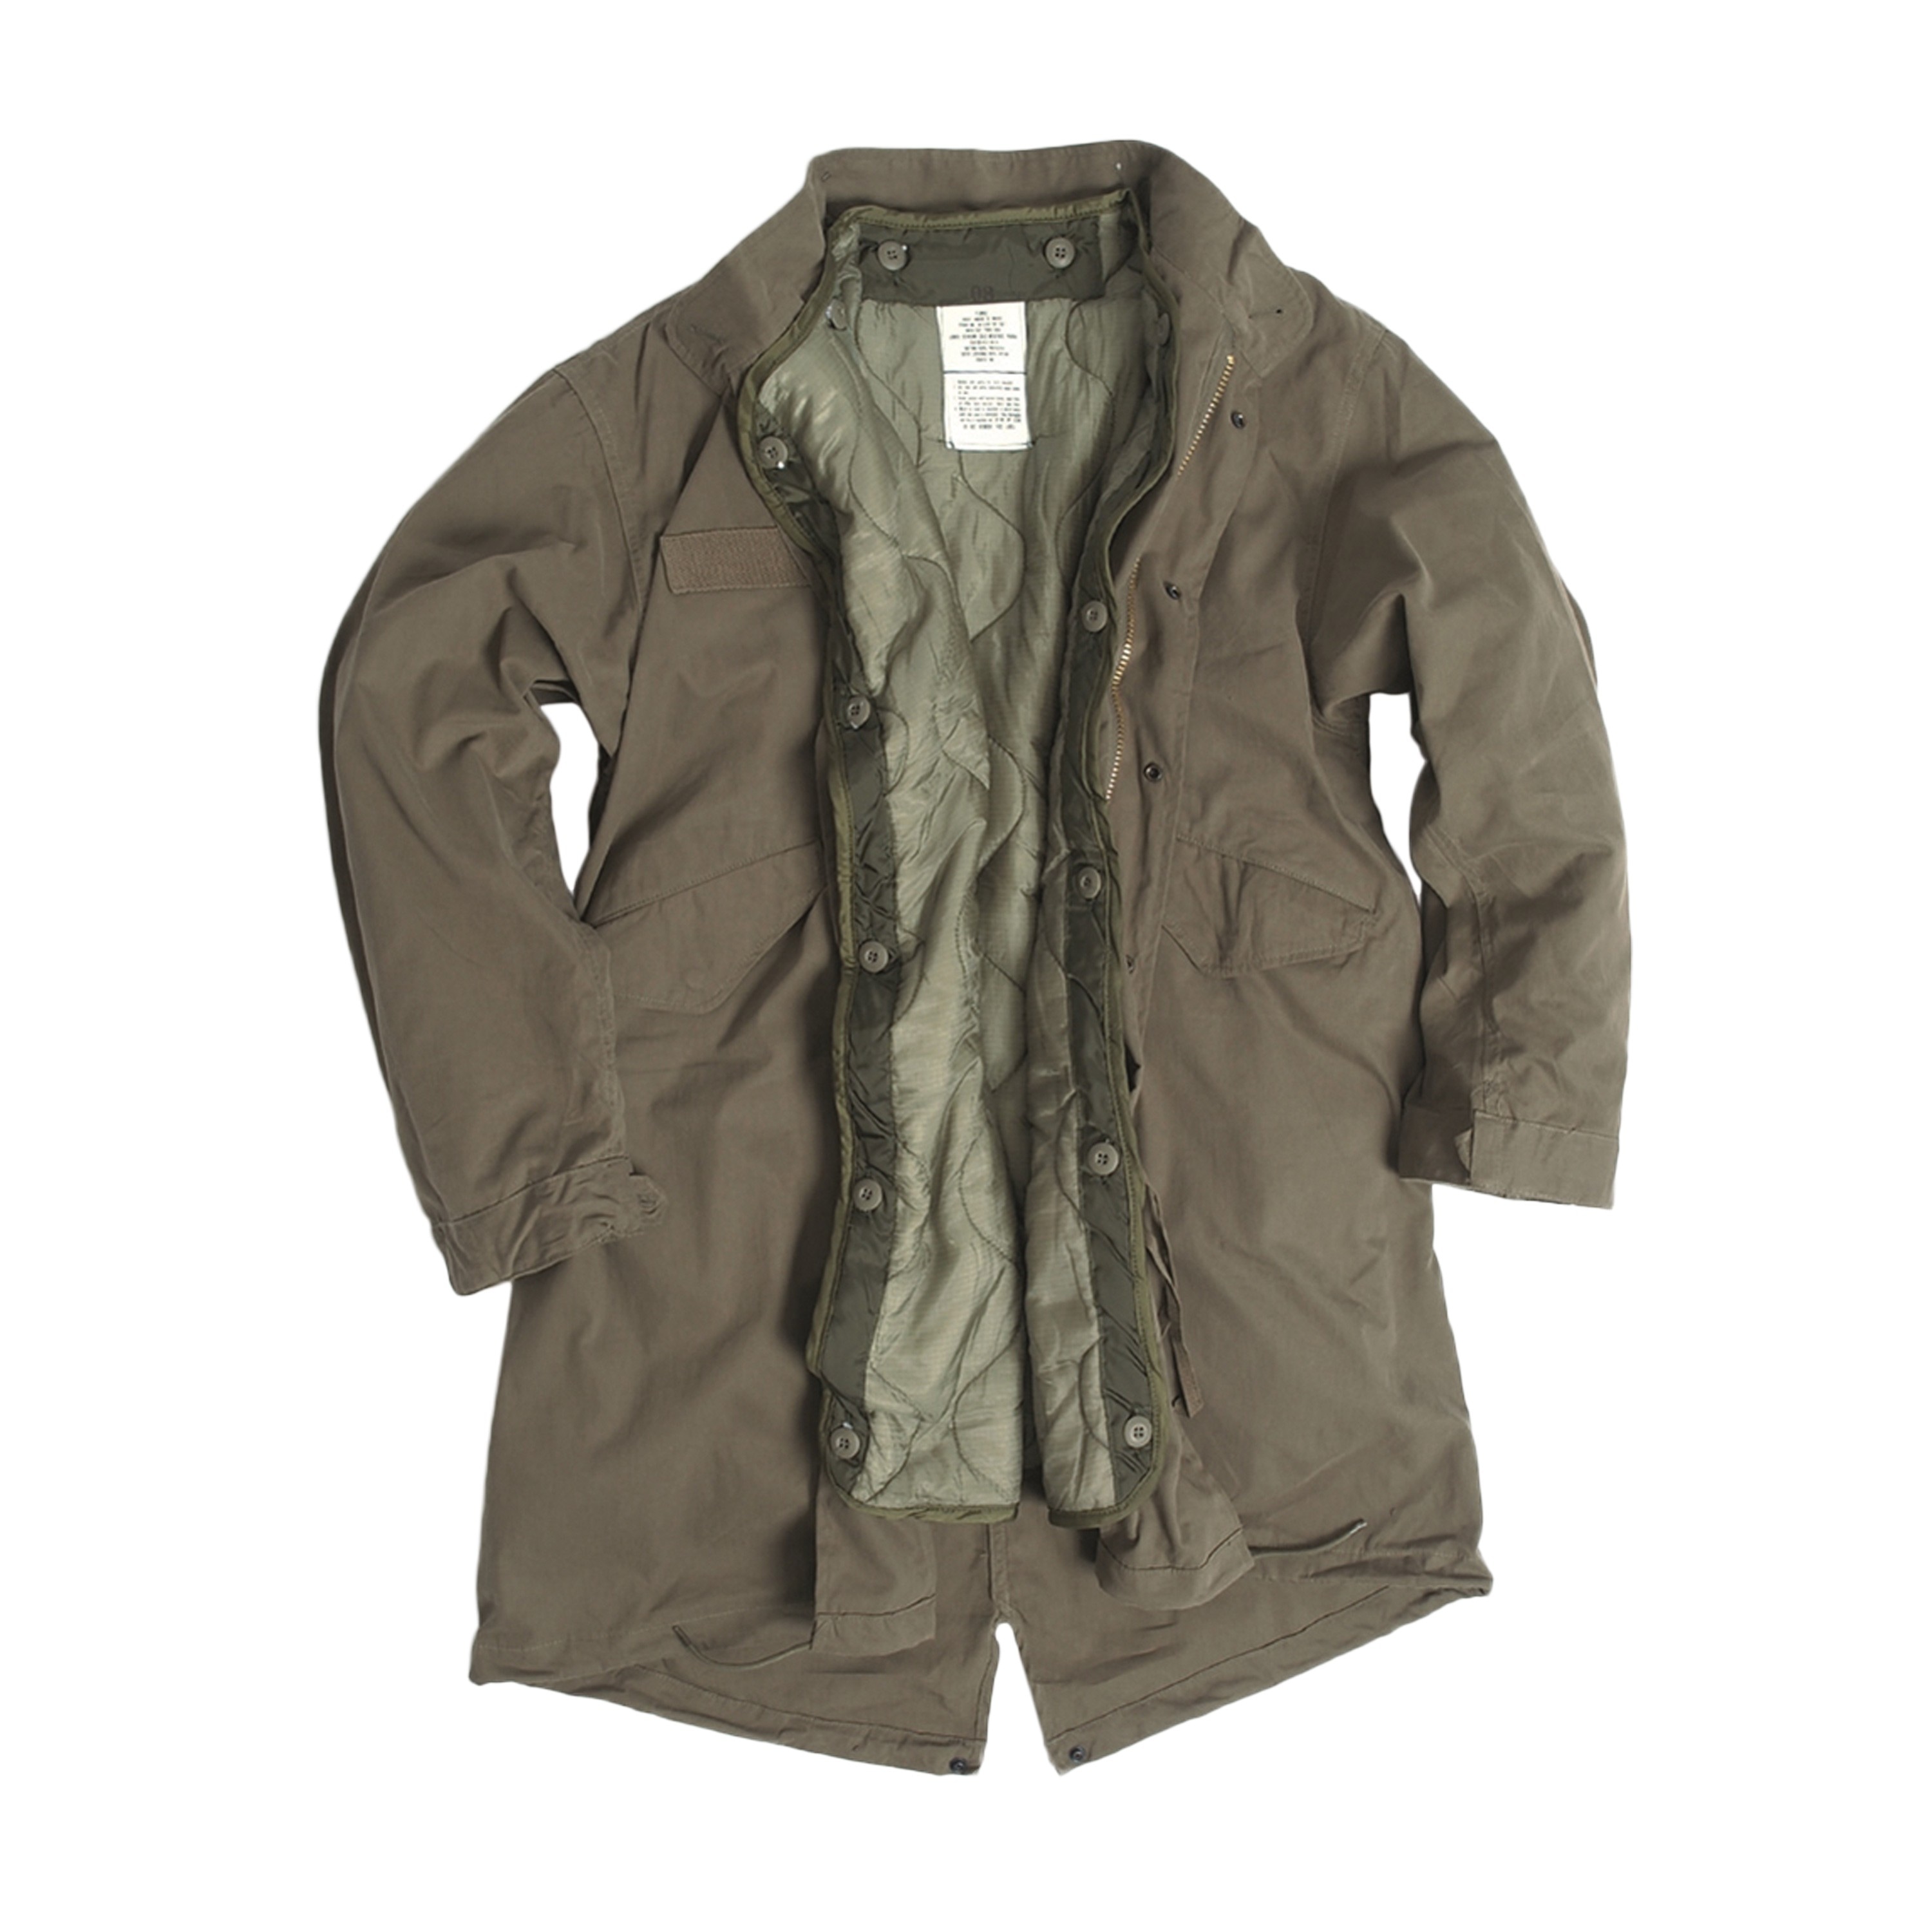 U.S. Shell Parka M65 with Liner olive | U.S. Shell Parka M65 with Liner ...